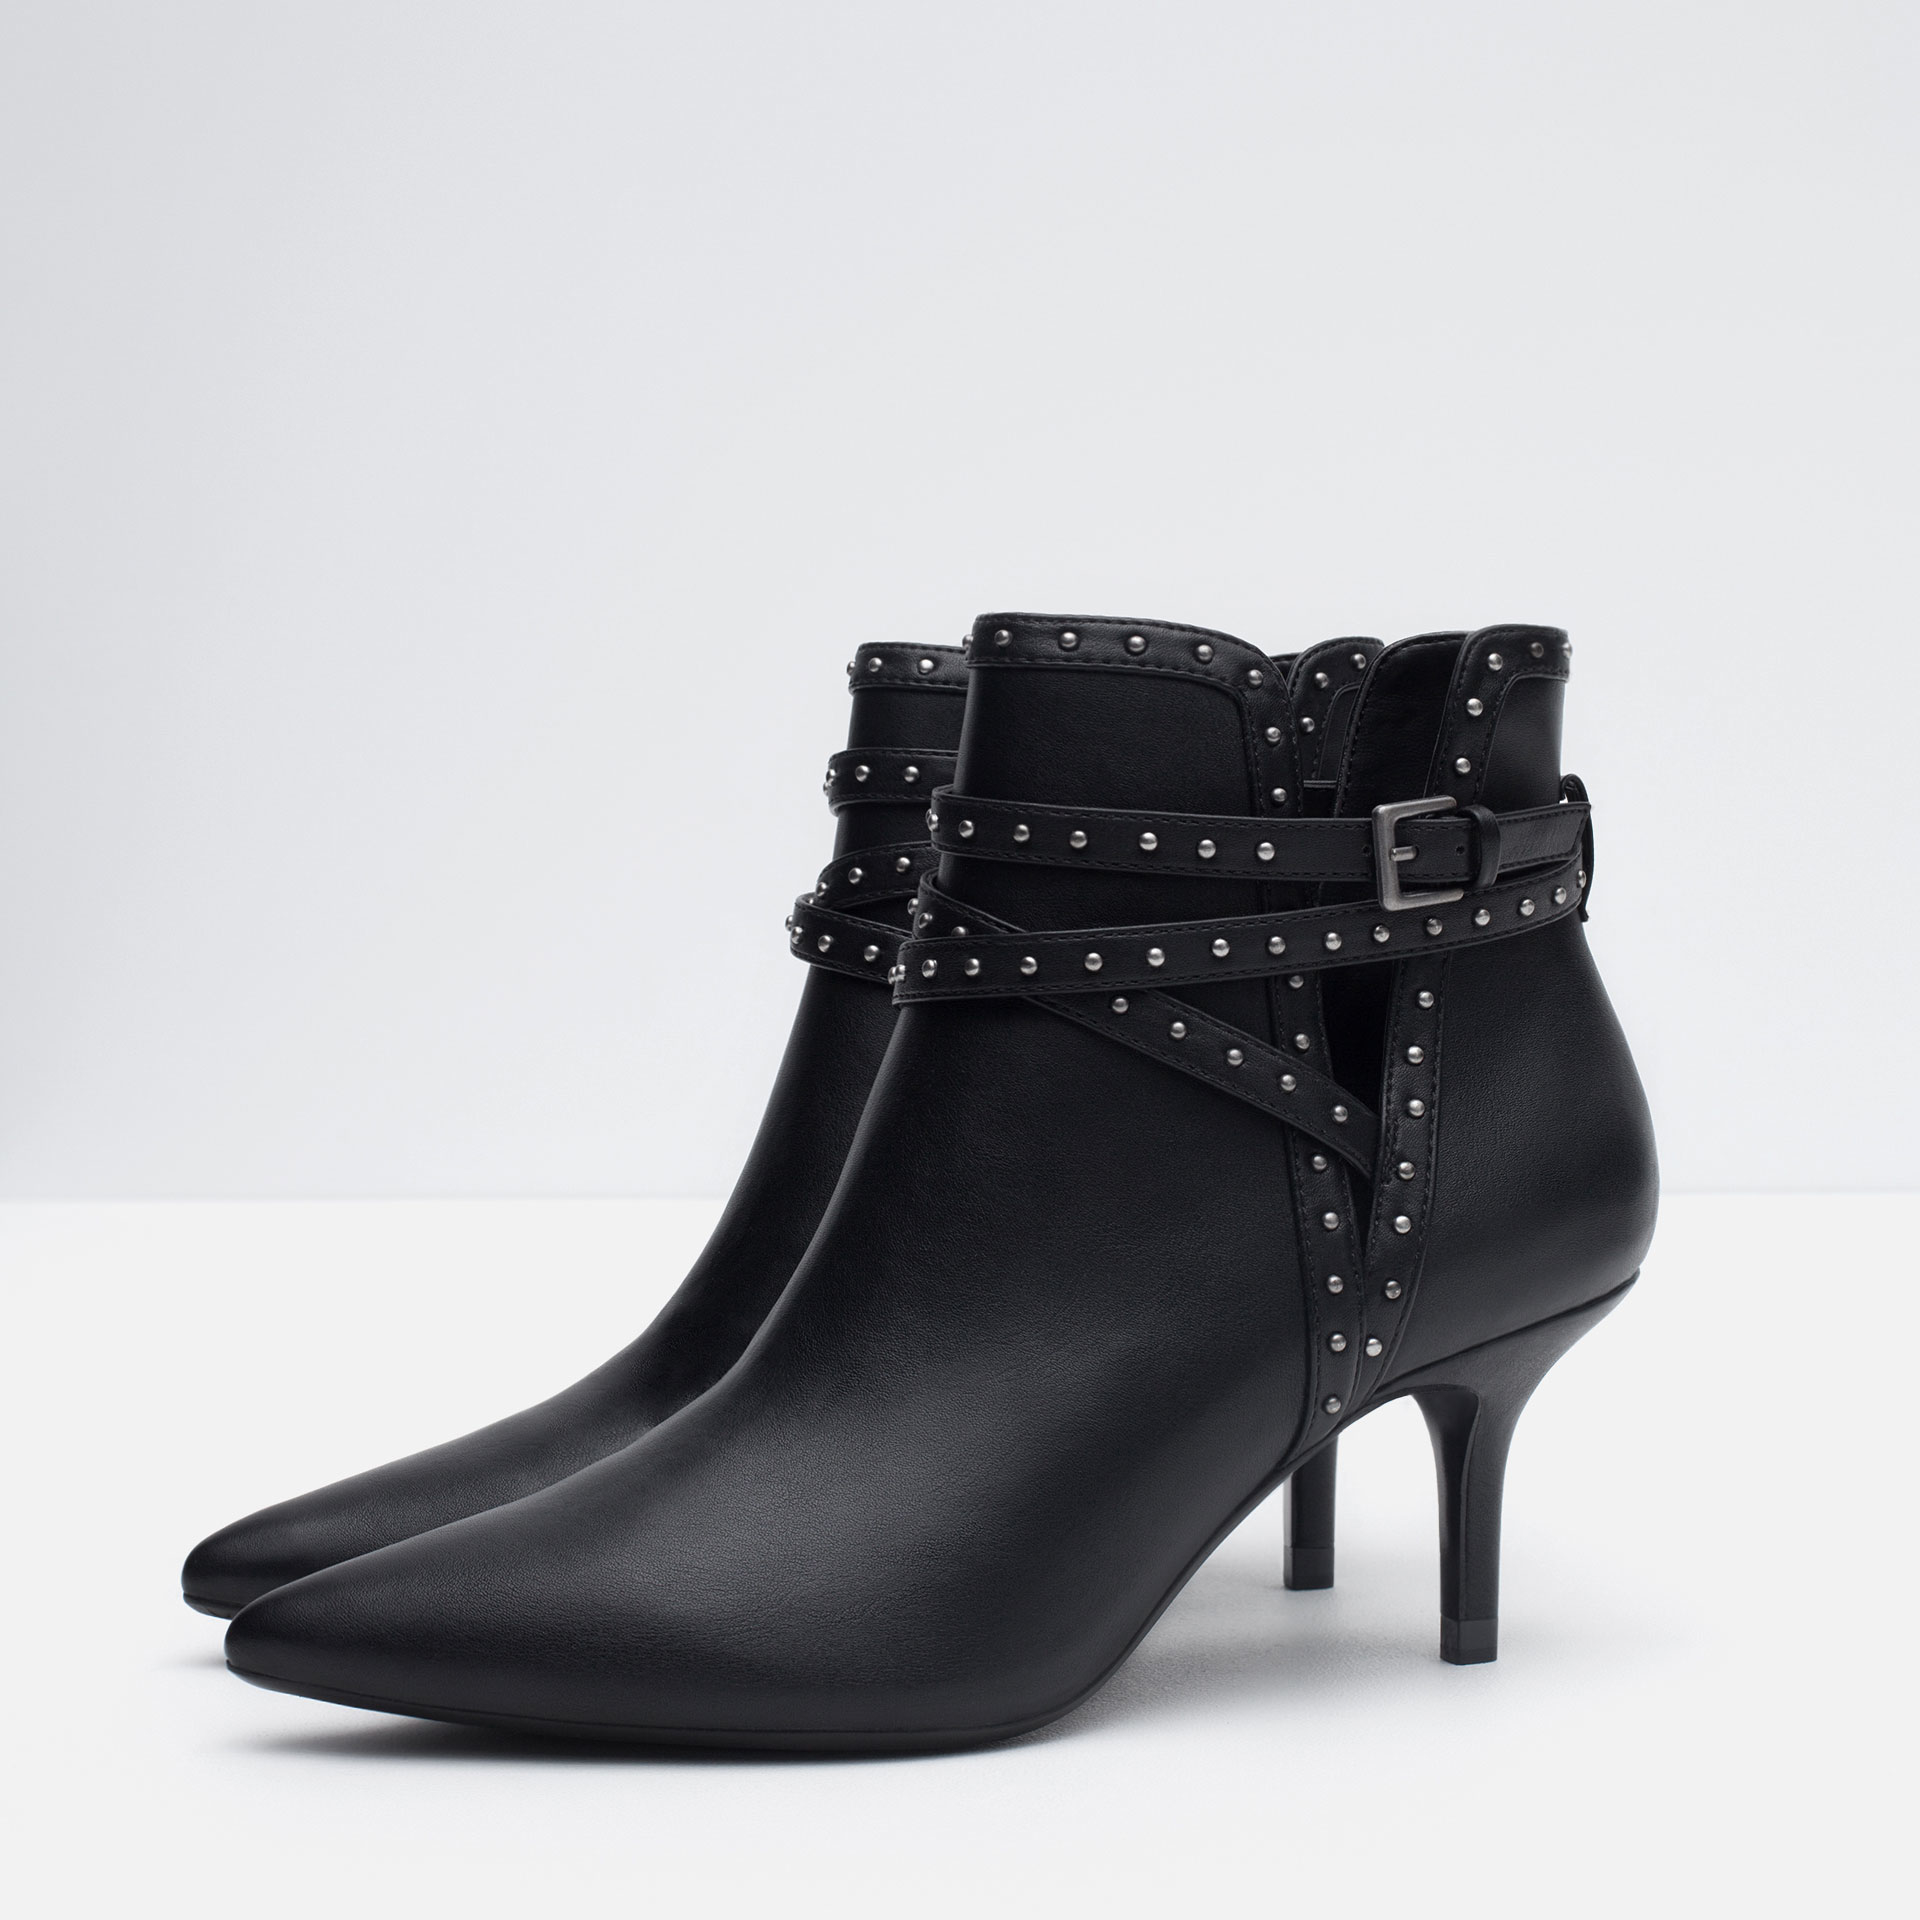 Black High Heel Ankle Boots